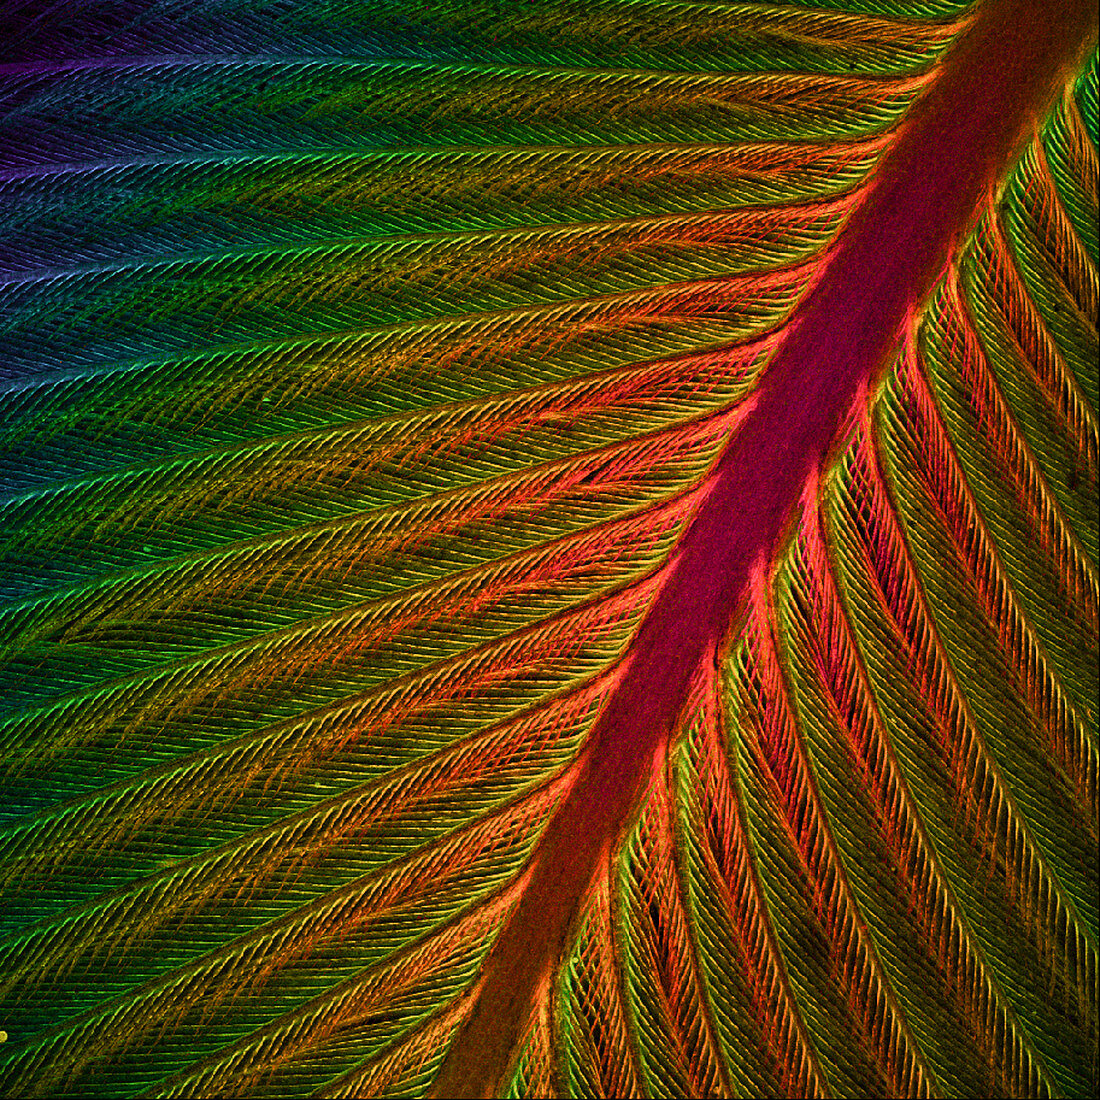 Feather, Micrograph